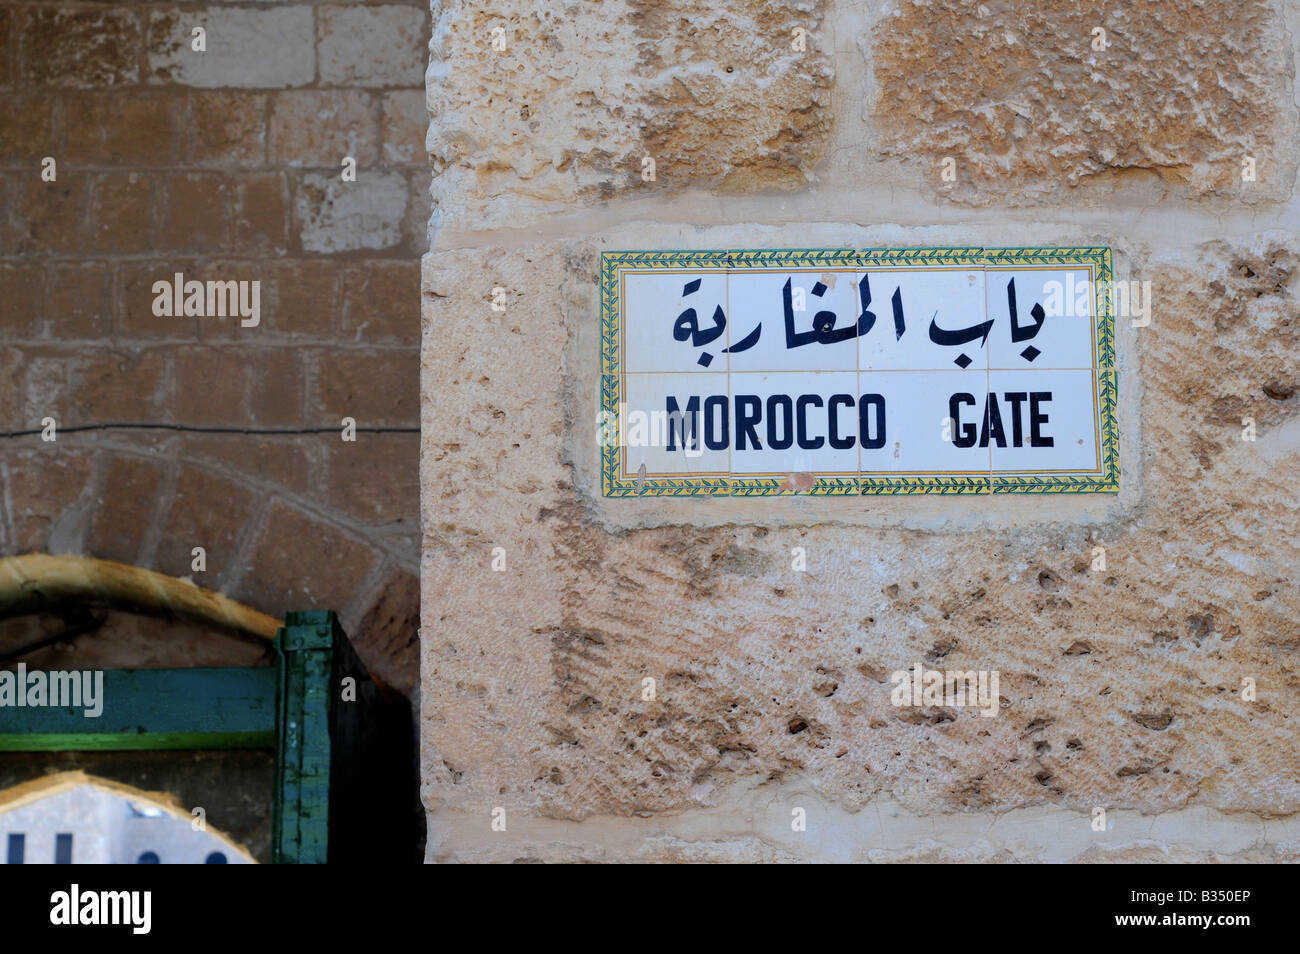 Sign for the Morocco Gate of the Temple Mount (Haram-al-Sharif) in Jerusalem's Old City- a sacred site for Muslims and Jews. Stock Photo